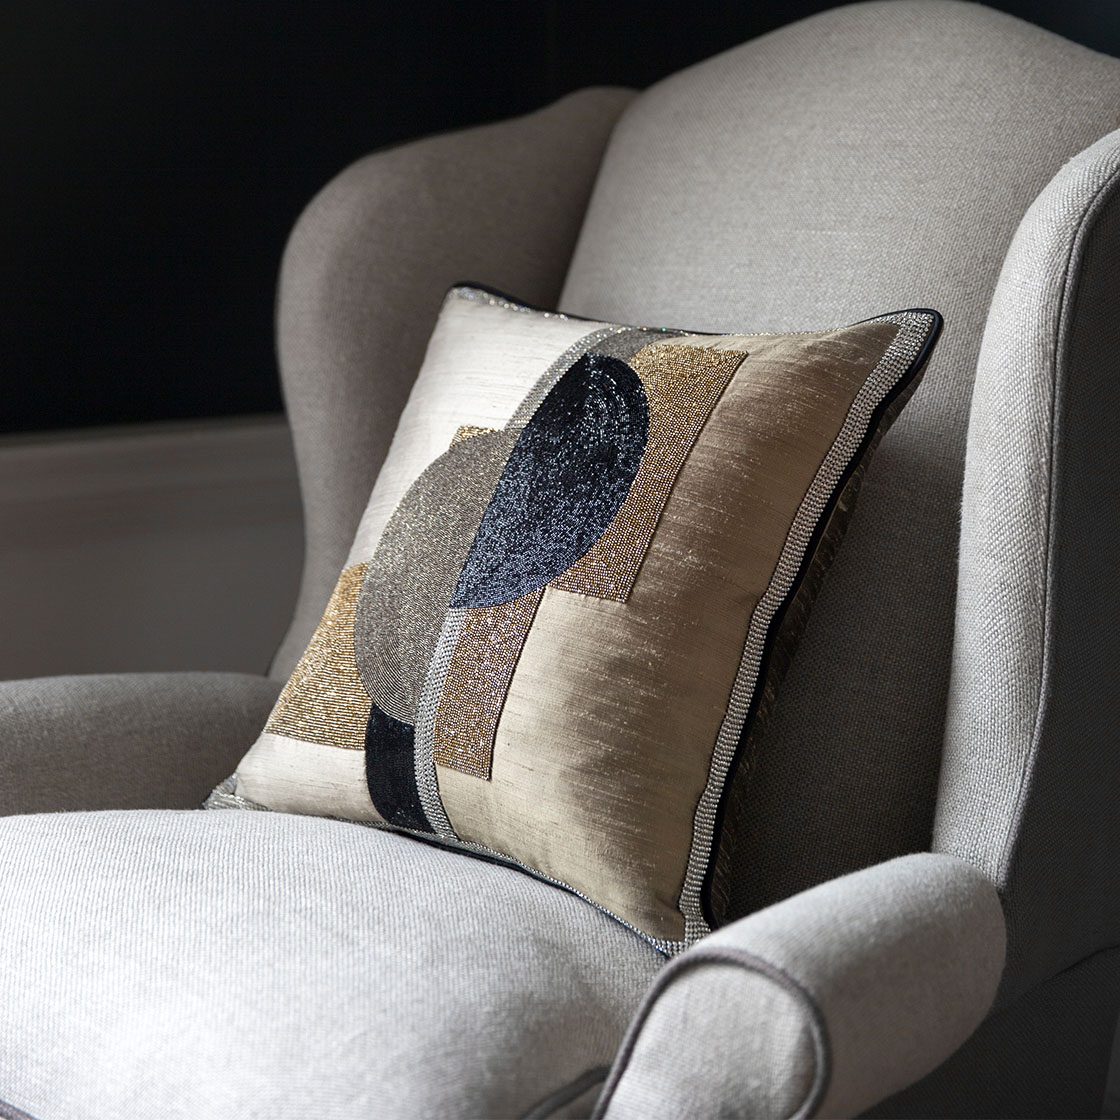 Club wing chair with Square legs in Donegal - Oatmeal and Slate with Piet cushion and Rococo light - Beaumont & Fletcher